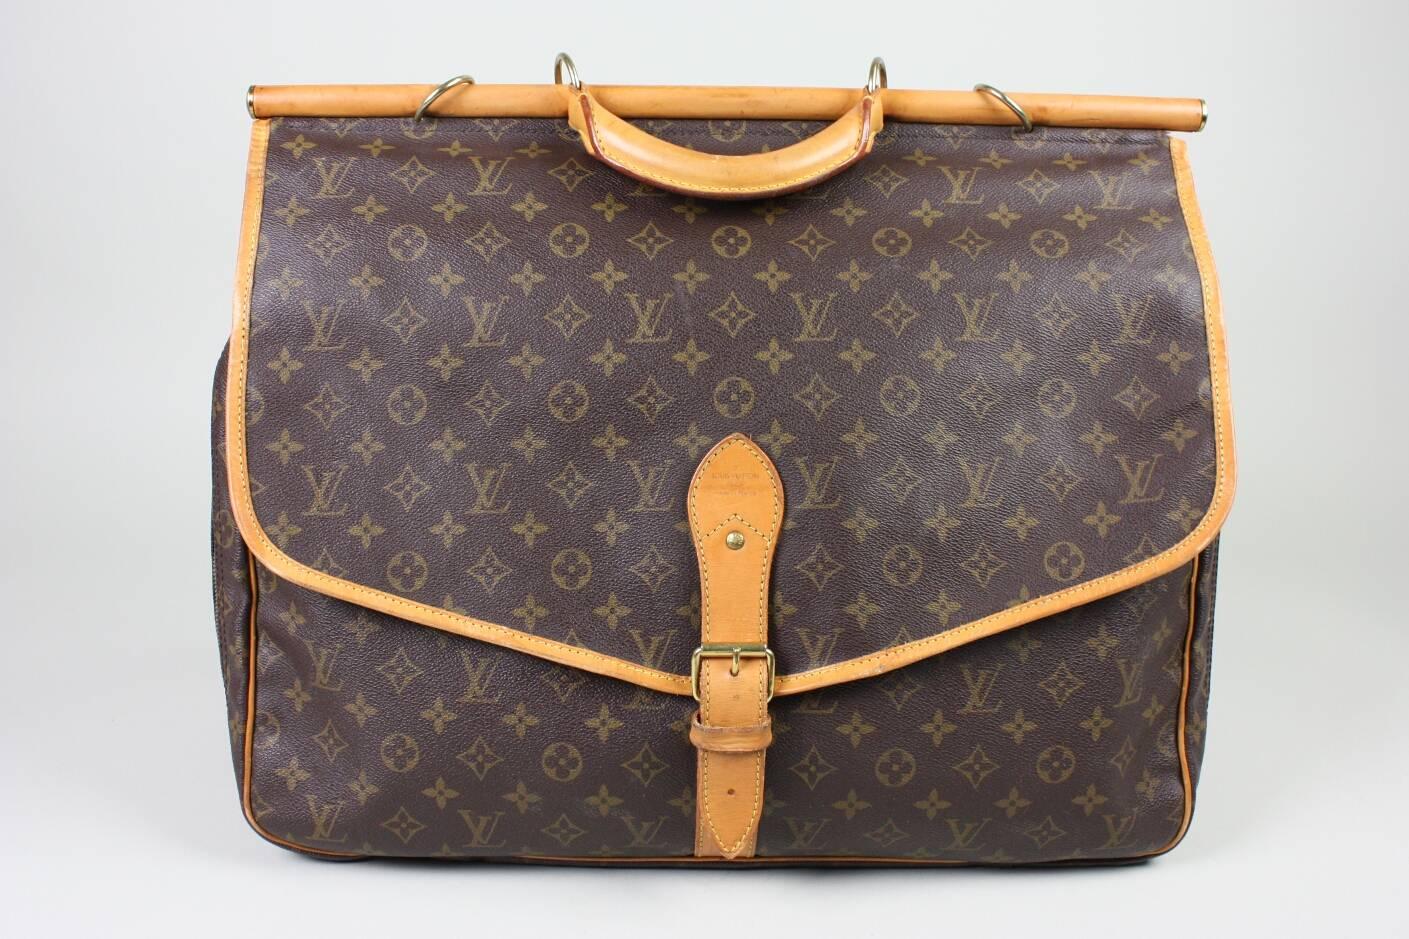 Louis Vuitton Sac Chasse is made of brown monogram coated canvas with tan vachetta leather trim.  It features brass hardware, rolled top handle, a single exterior pocket at front, and a flap pocket at back with three compartments.  Main compartment